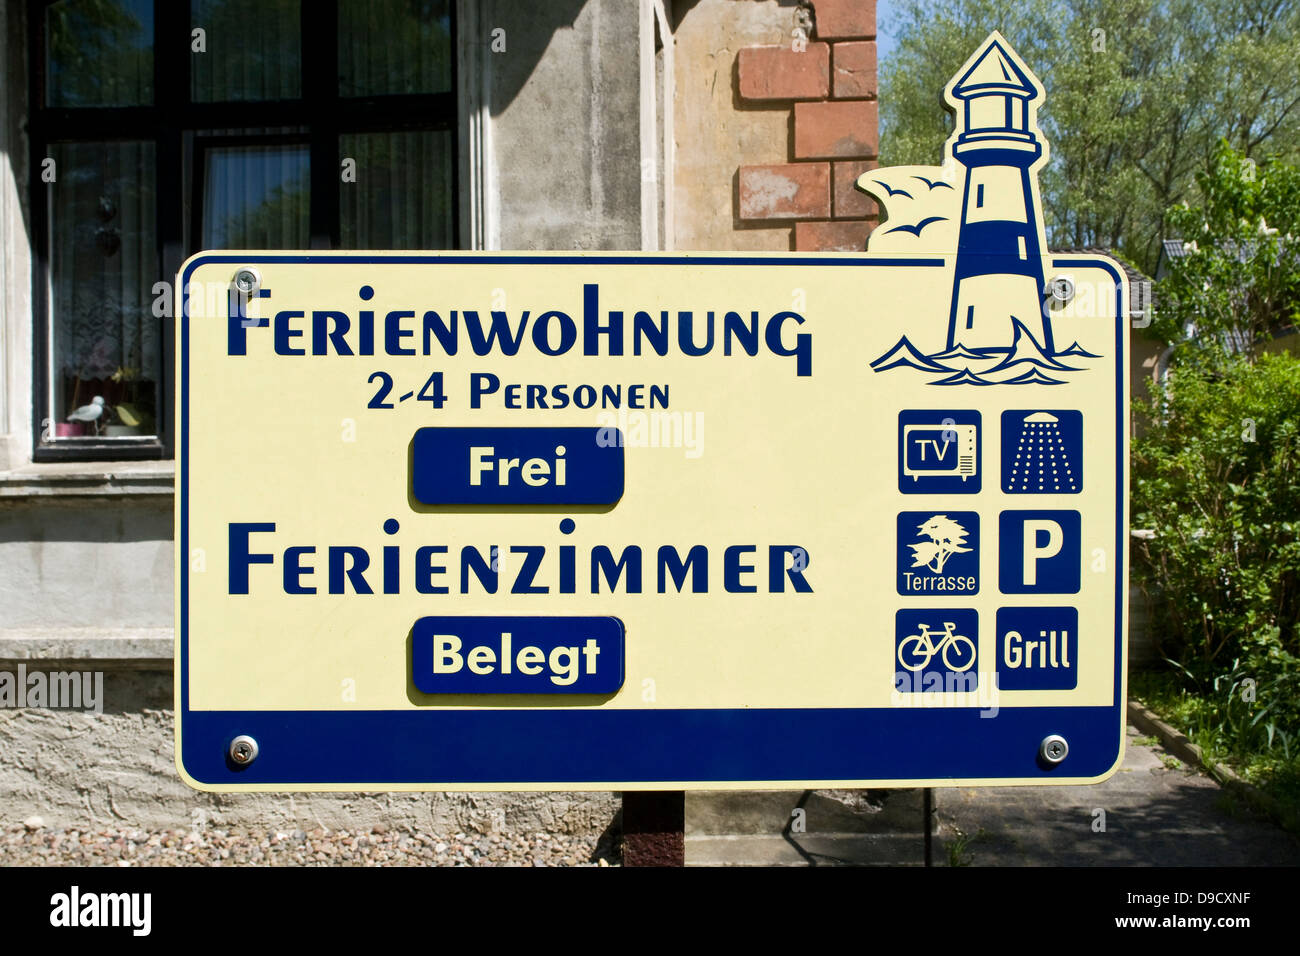 Info sign for the renting of room and holiday apartments Stock Photo